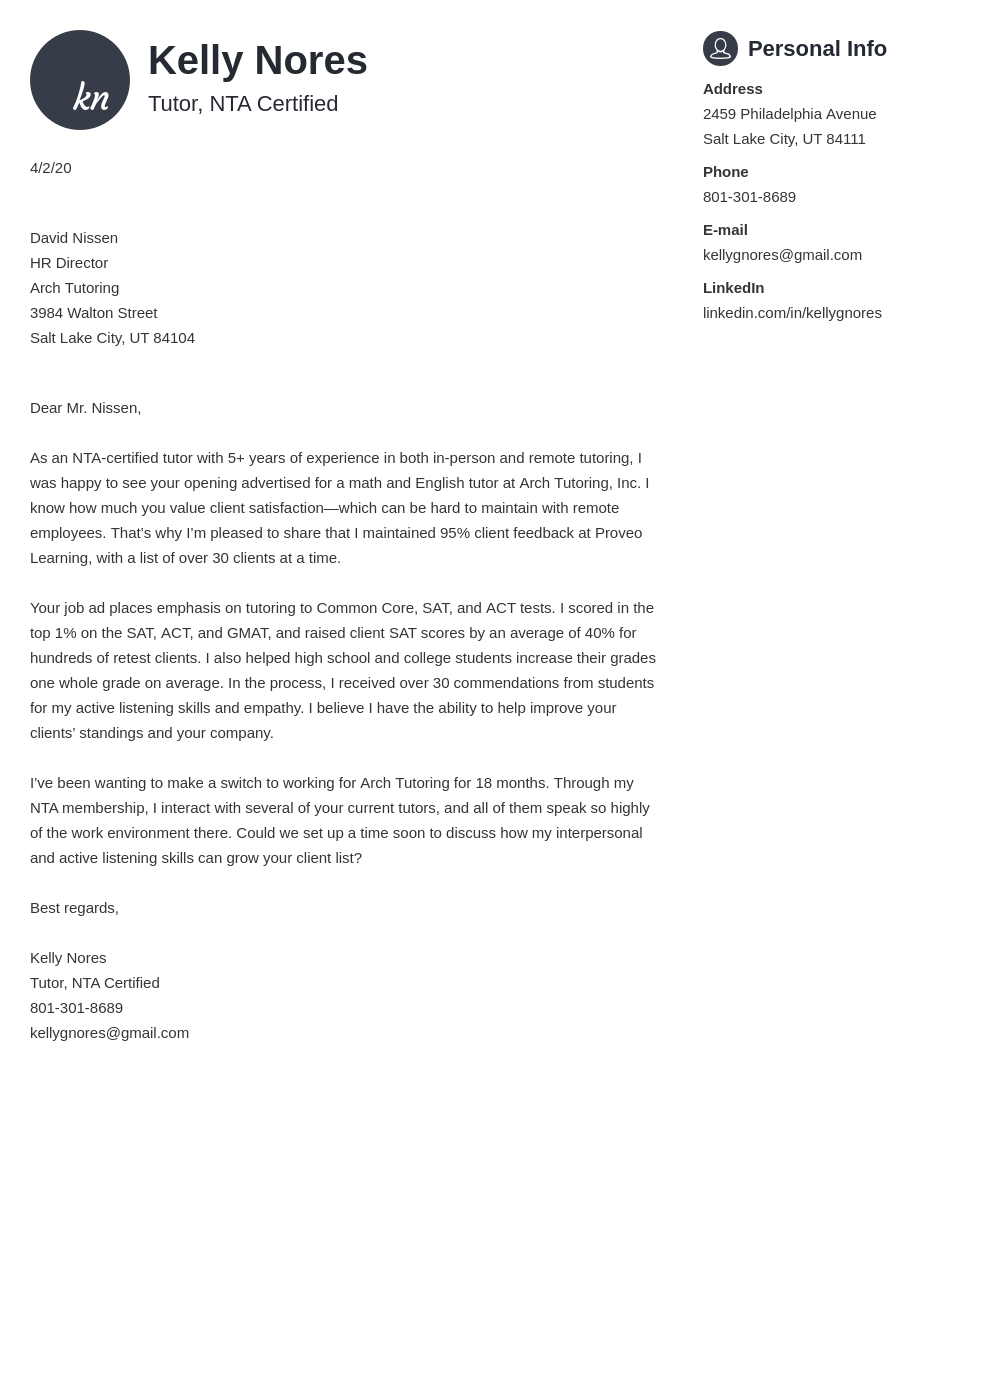 example of application letter for tutor position